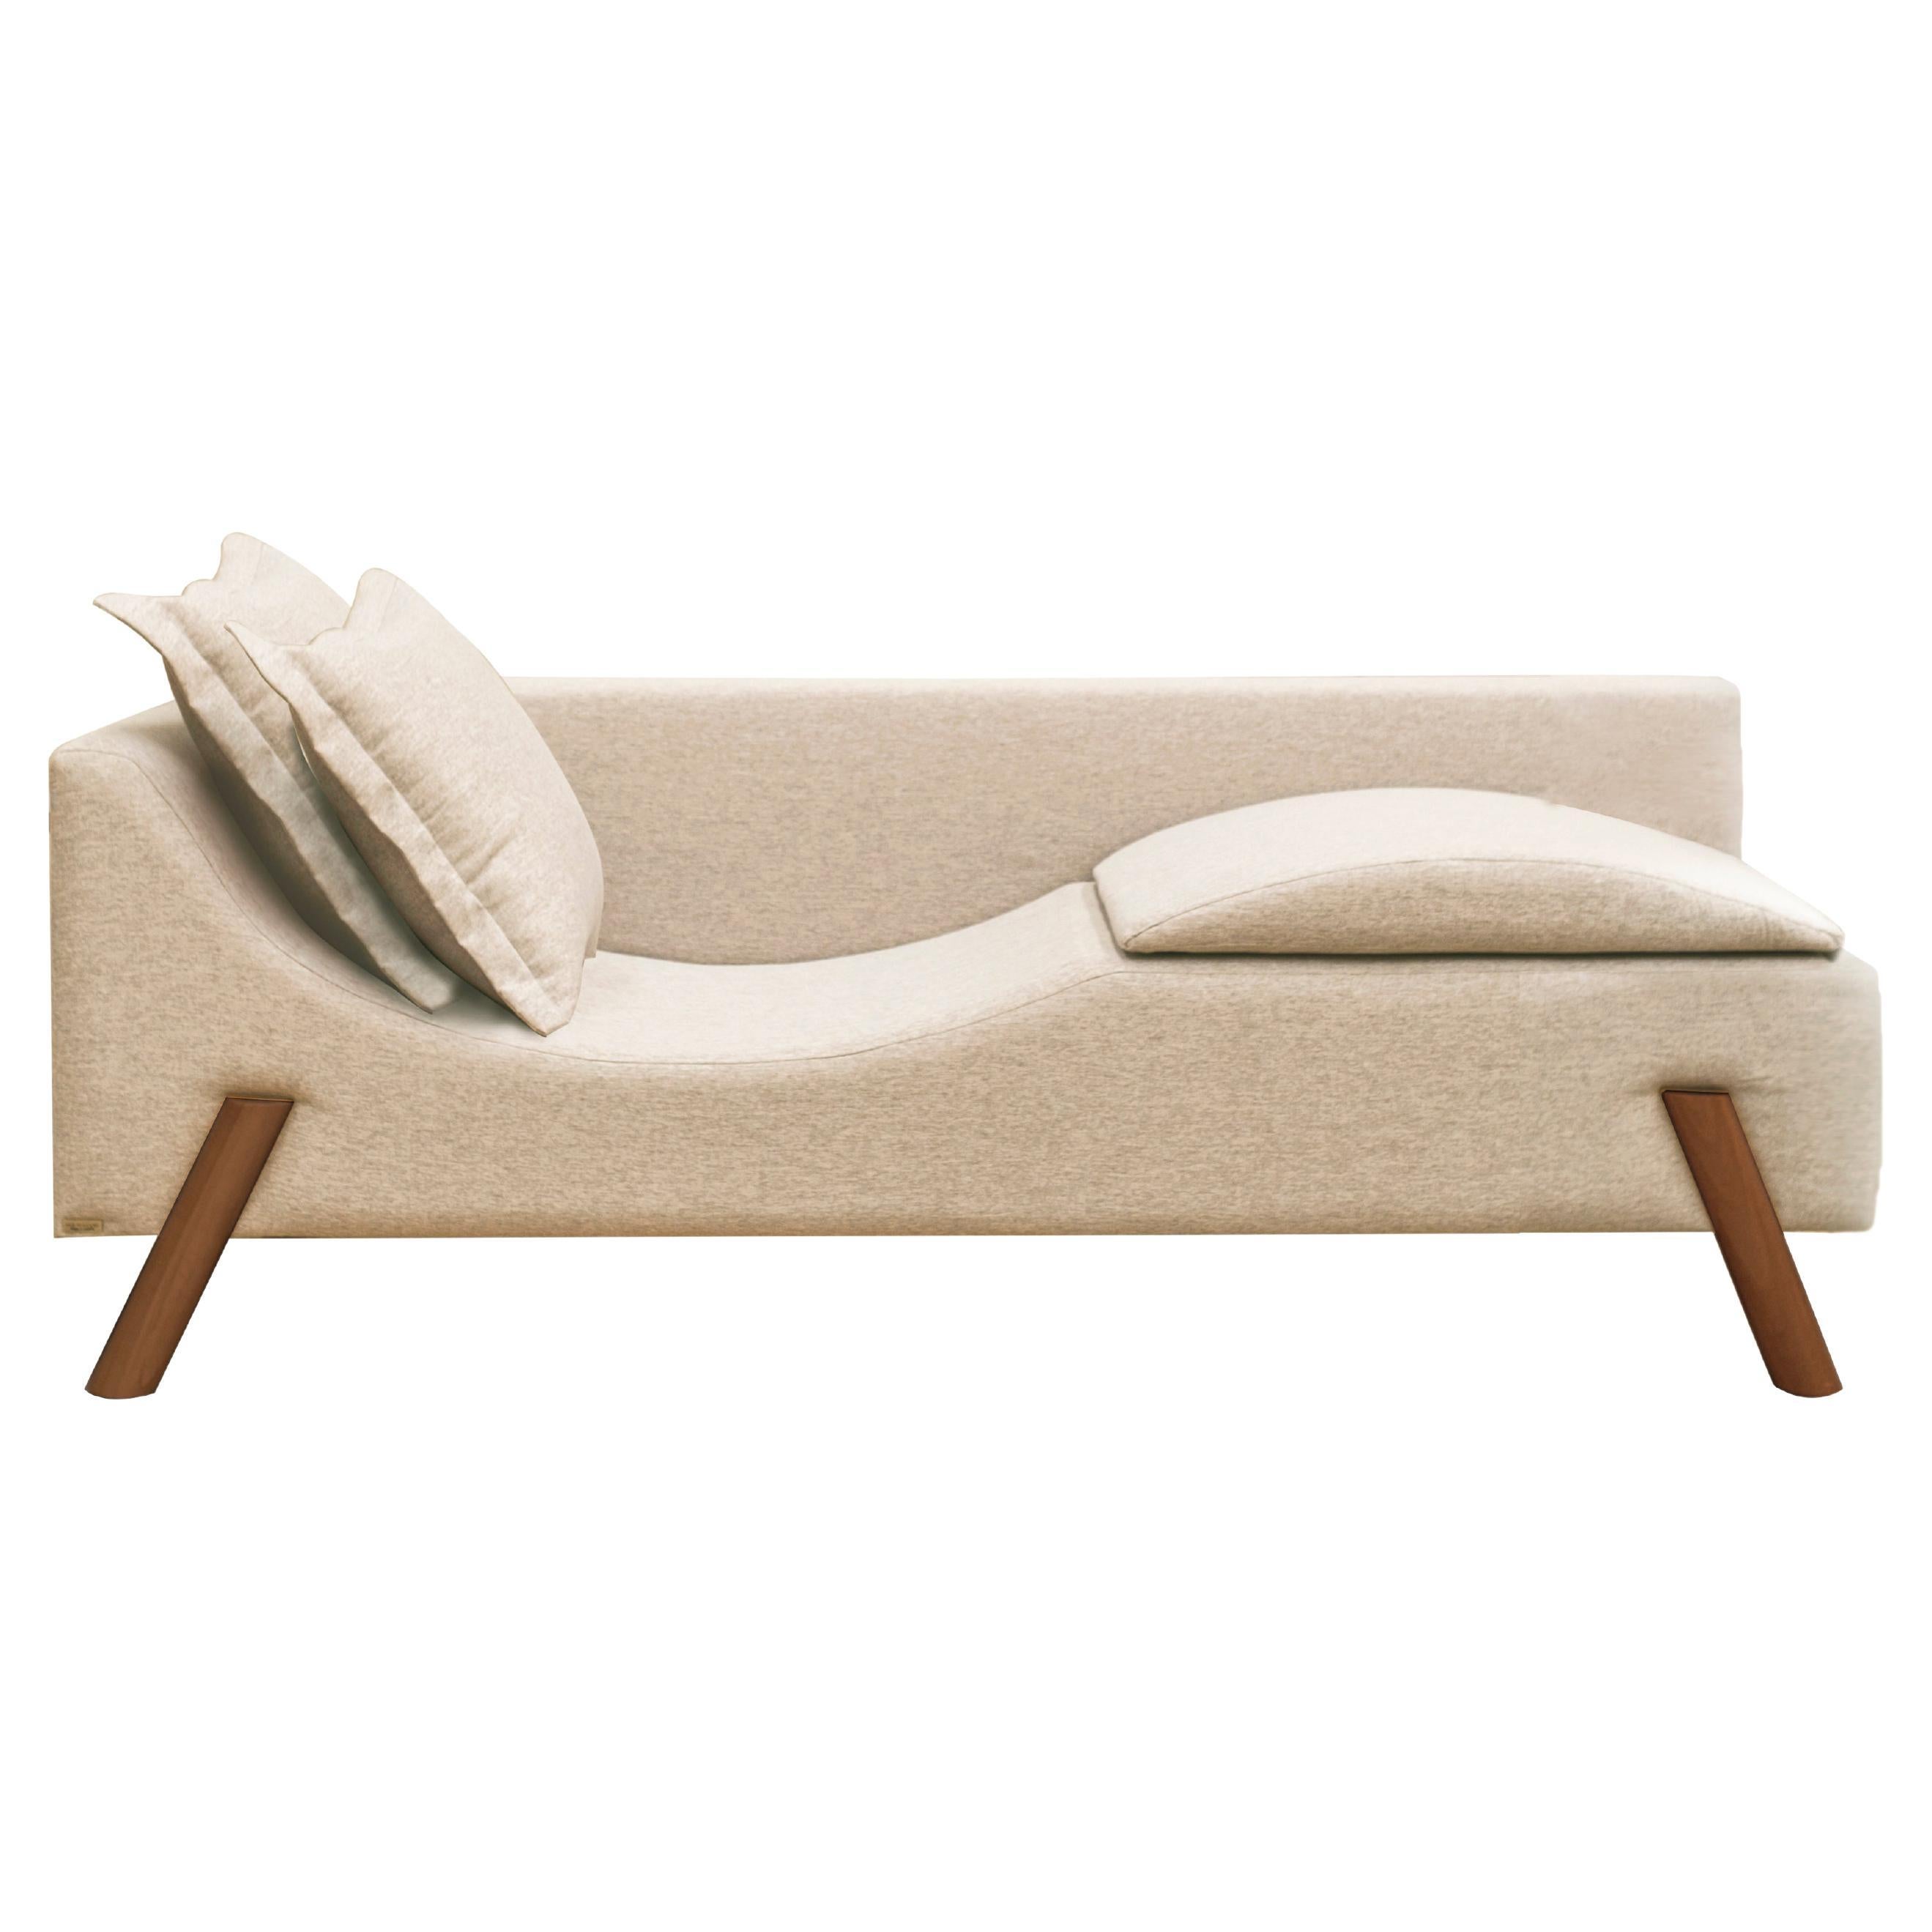 "Flag" Couch and Chaise Longue in Natural Linen and Wood Feet, Small Size For Sale